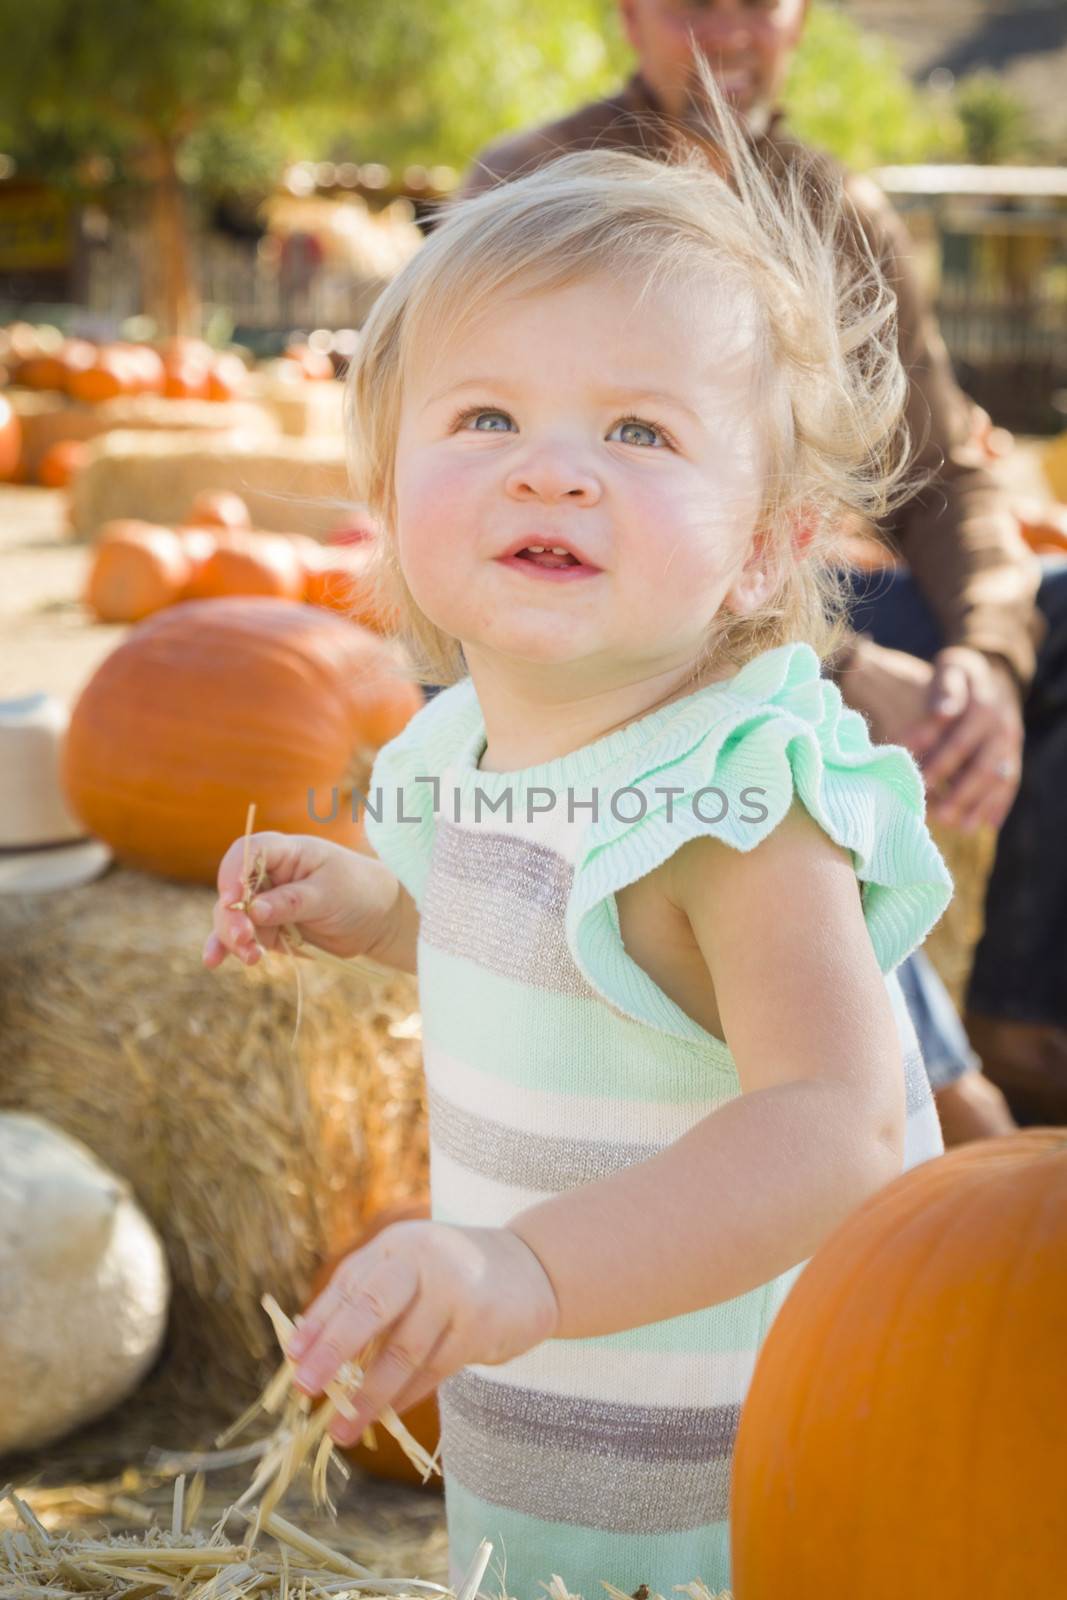 Adorable Baby Girl Having Fun at the Pumpkin Patch
 by Feverpitched